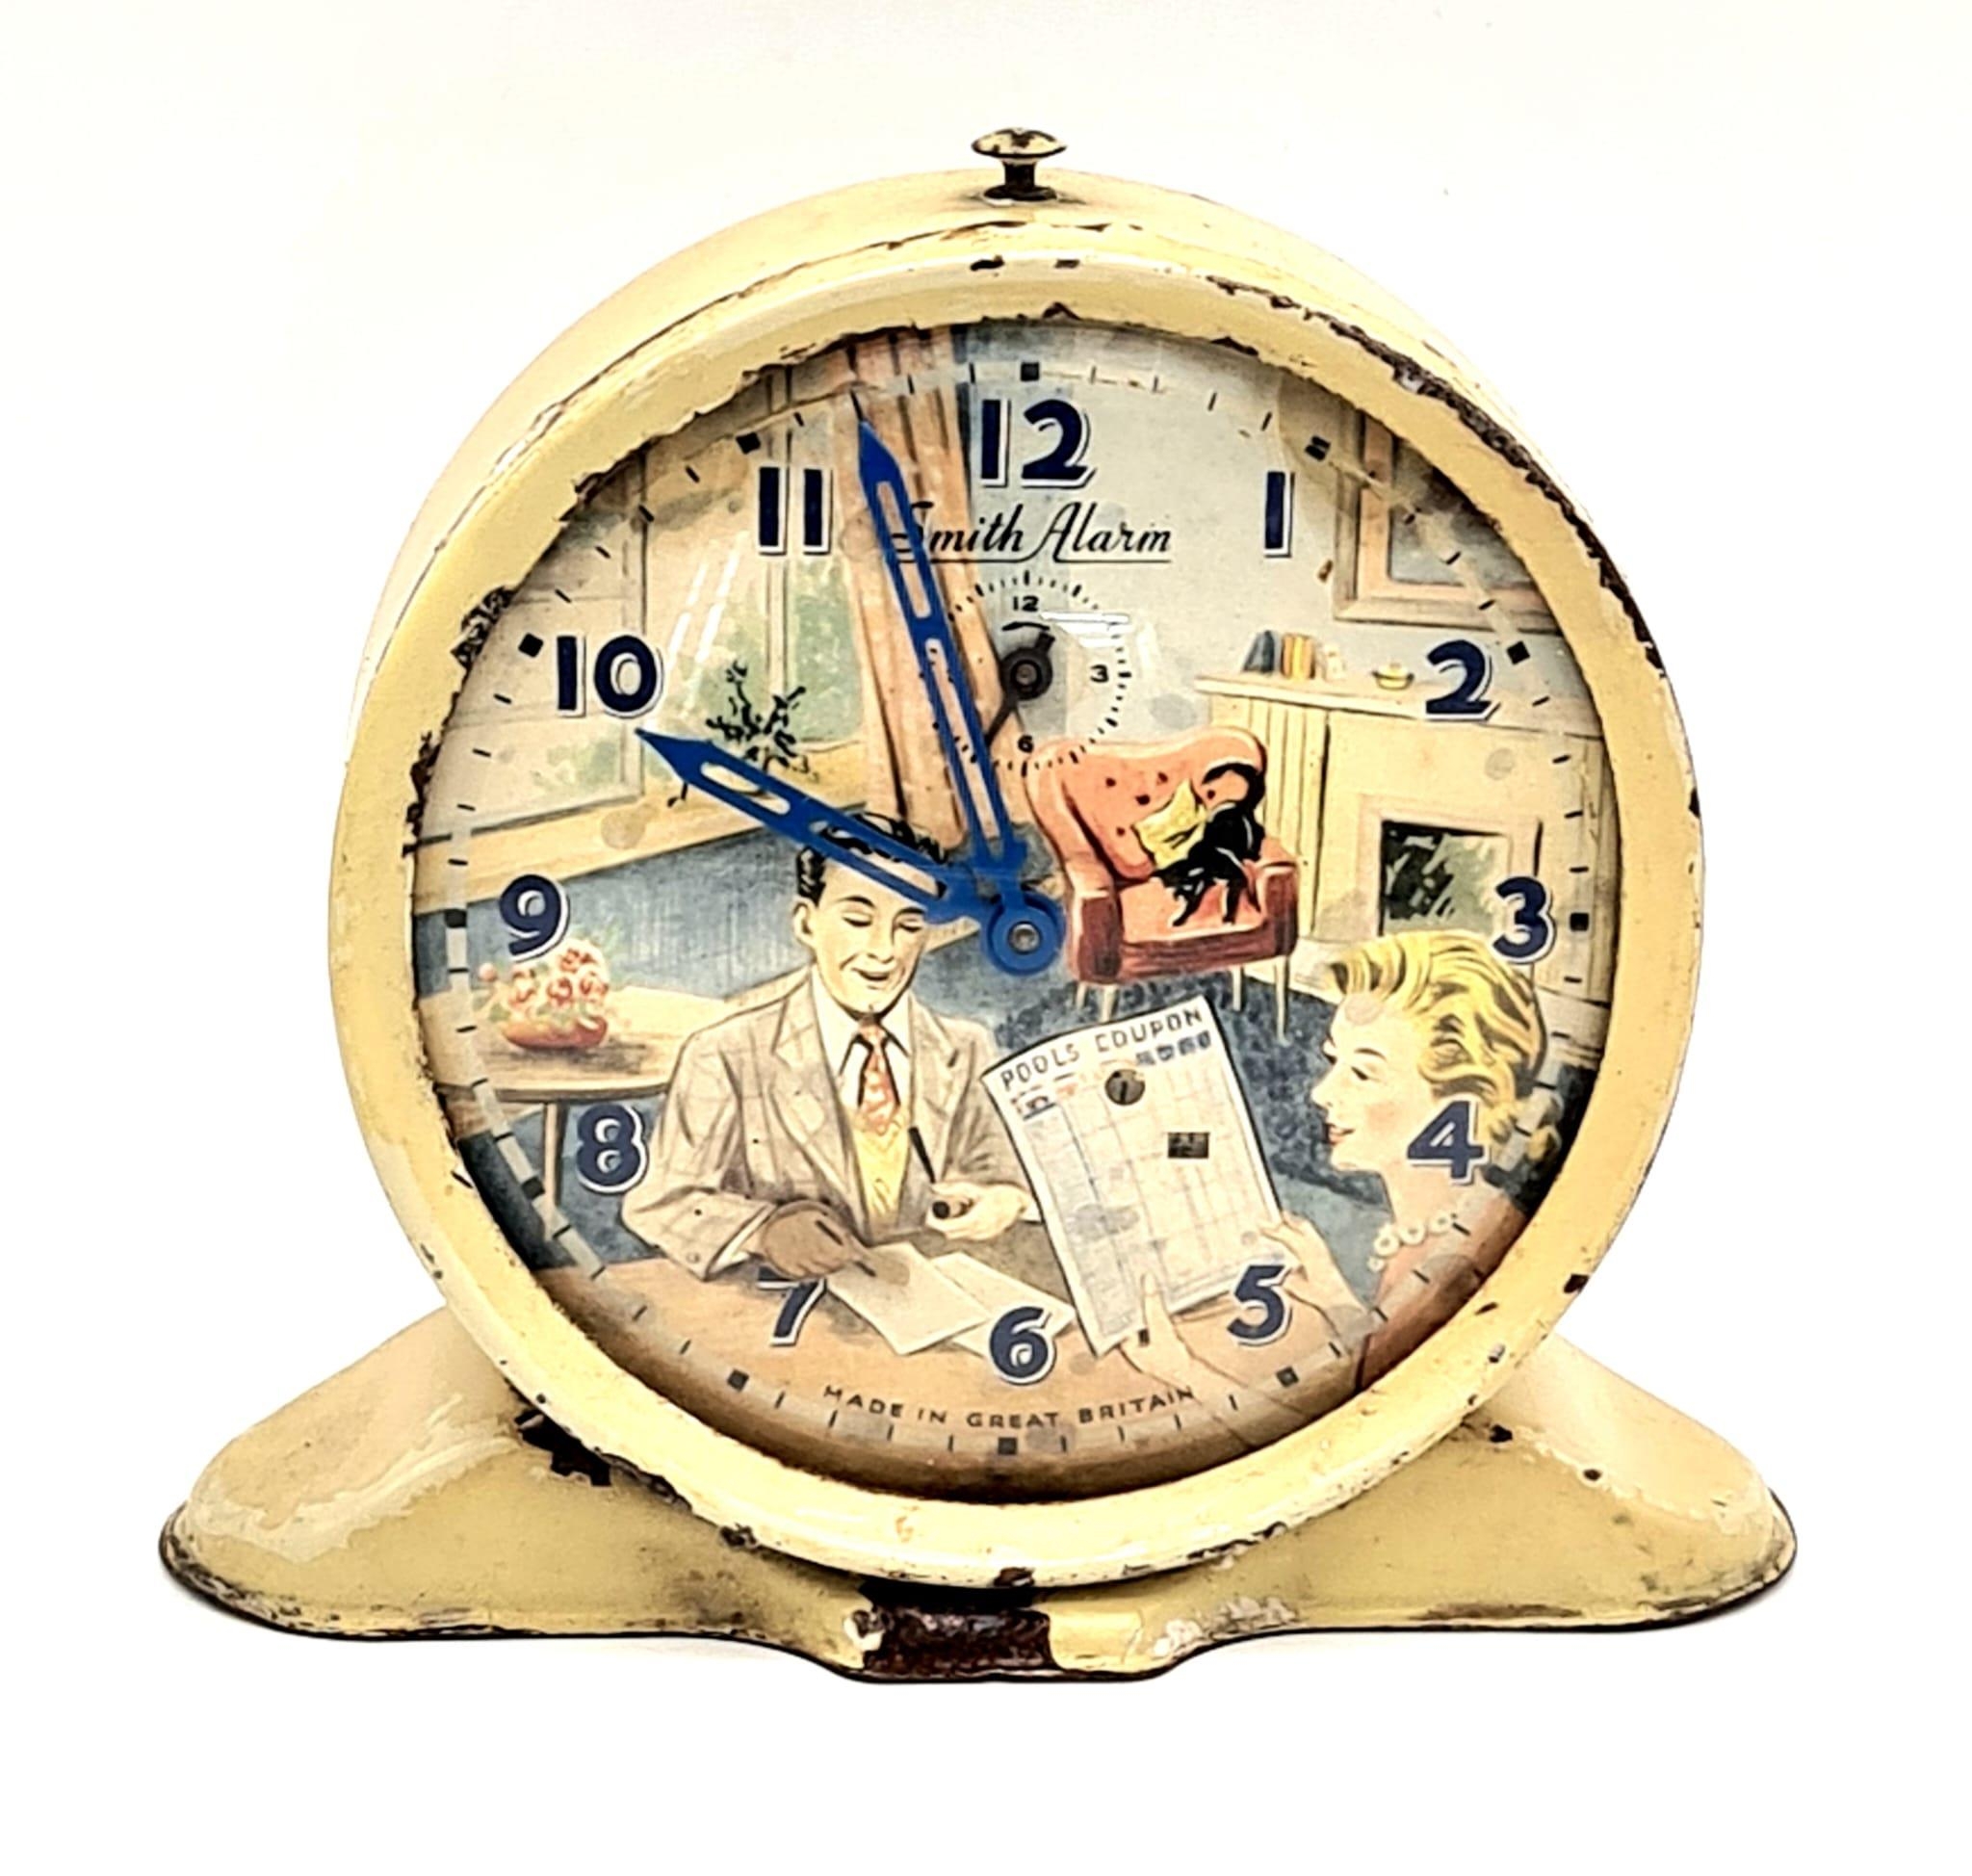 A Classic Smiths Vintage Pools Alarm Clock. Pen and pools coupon move! Works but a/f. 12cm tall.